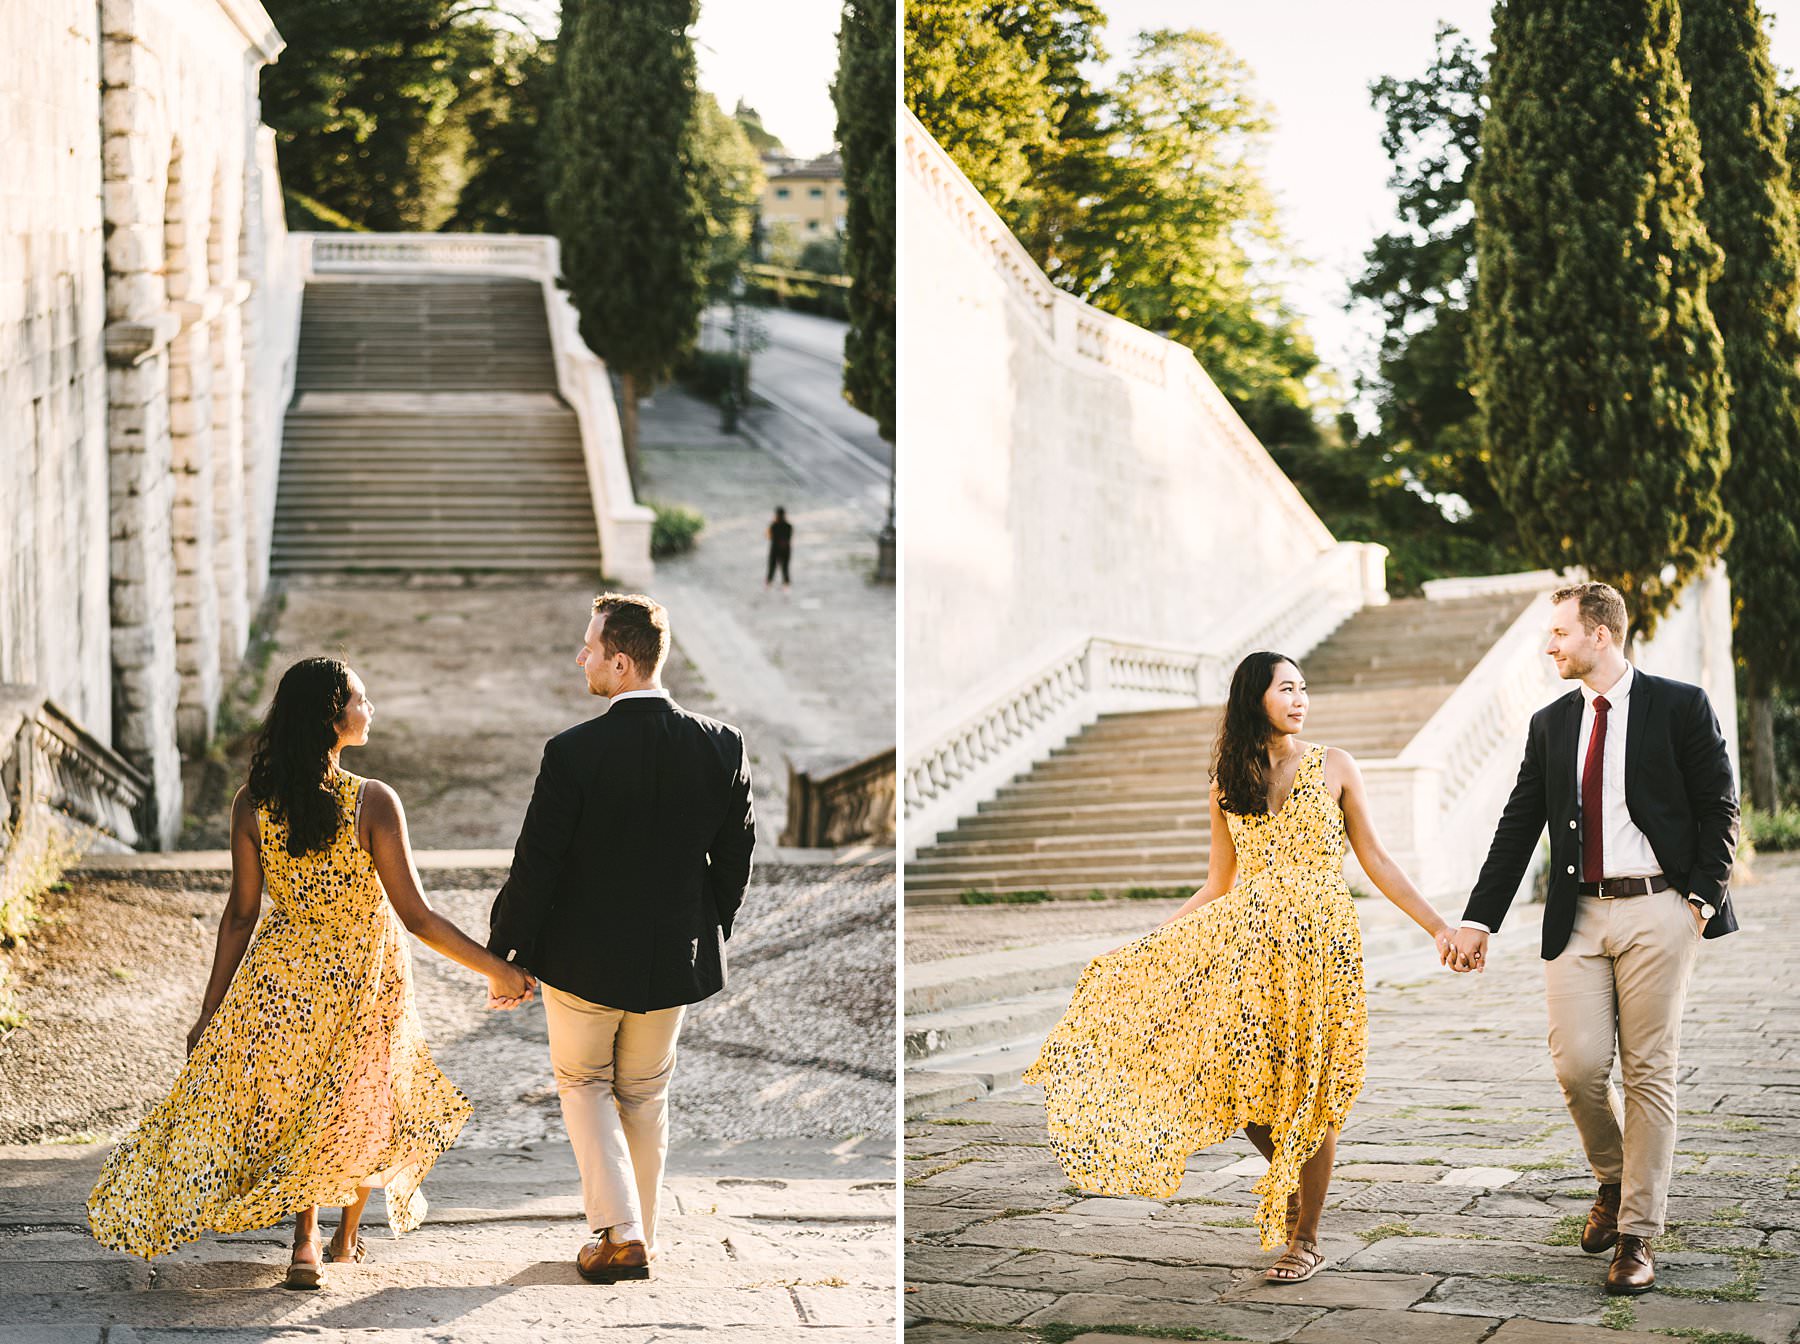 Angela and Max’s surprise marriage proposal followed by a sweet engagement photoshoot in Florence! Right after the proposal, it was time to celebrate through an engagement photoshoot full of sentiment, with Florence as a beautiful background. We snapped pictures all around the heart of the city, starting from the surroundings of San Miniato al Monte itself and continuing to Ponte Vecchio, Palazzo Vecchio and Uffizi Gallery. The warm light of the day matched perfectly with the color of Angela’s dress, and with the bright smile of both these guys